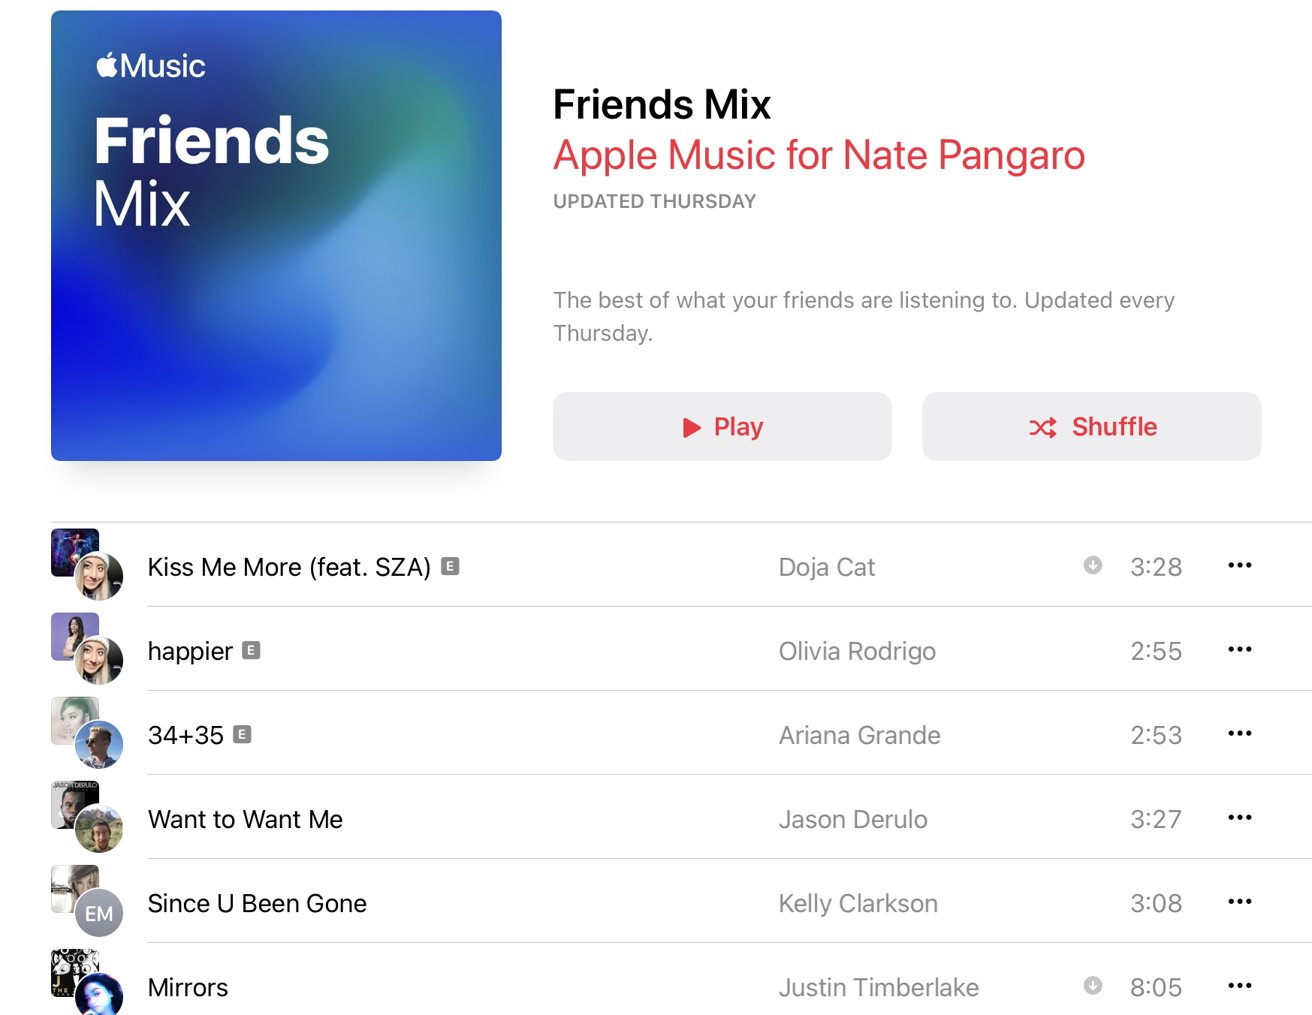 How you can use the hidden social options in Apple Music to assist discovery